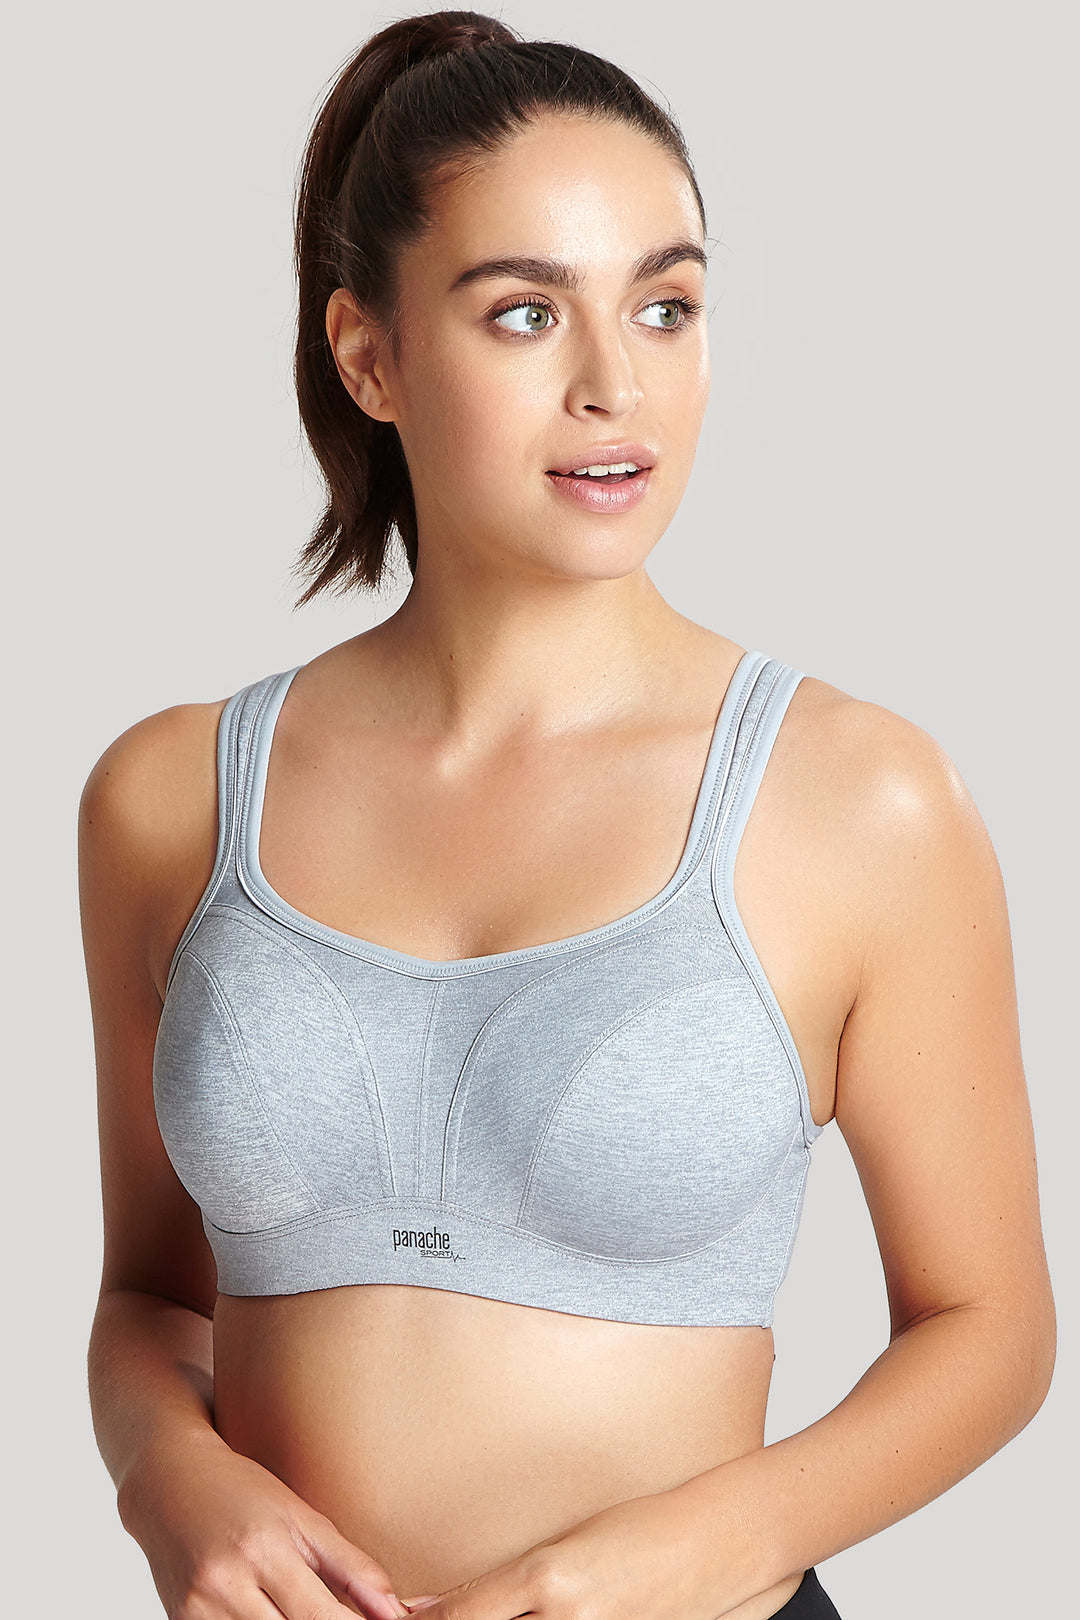 Essentials Laminated Cup Seamed Underwired Sag Lift Bra Pink 6929886.htm -  Buy Essentials Laminated Cup Seamed Underwired Sag Lift Bra Pink  6929886.htm online in India